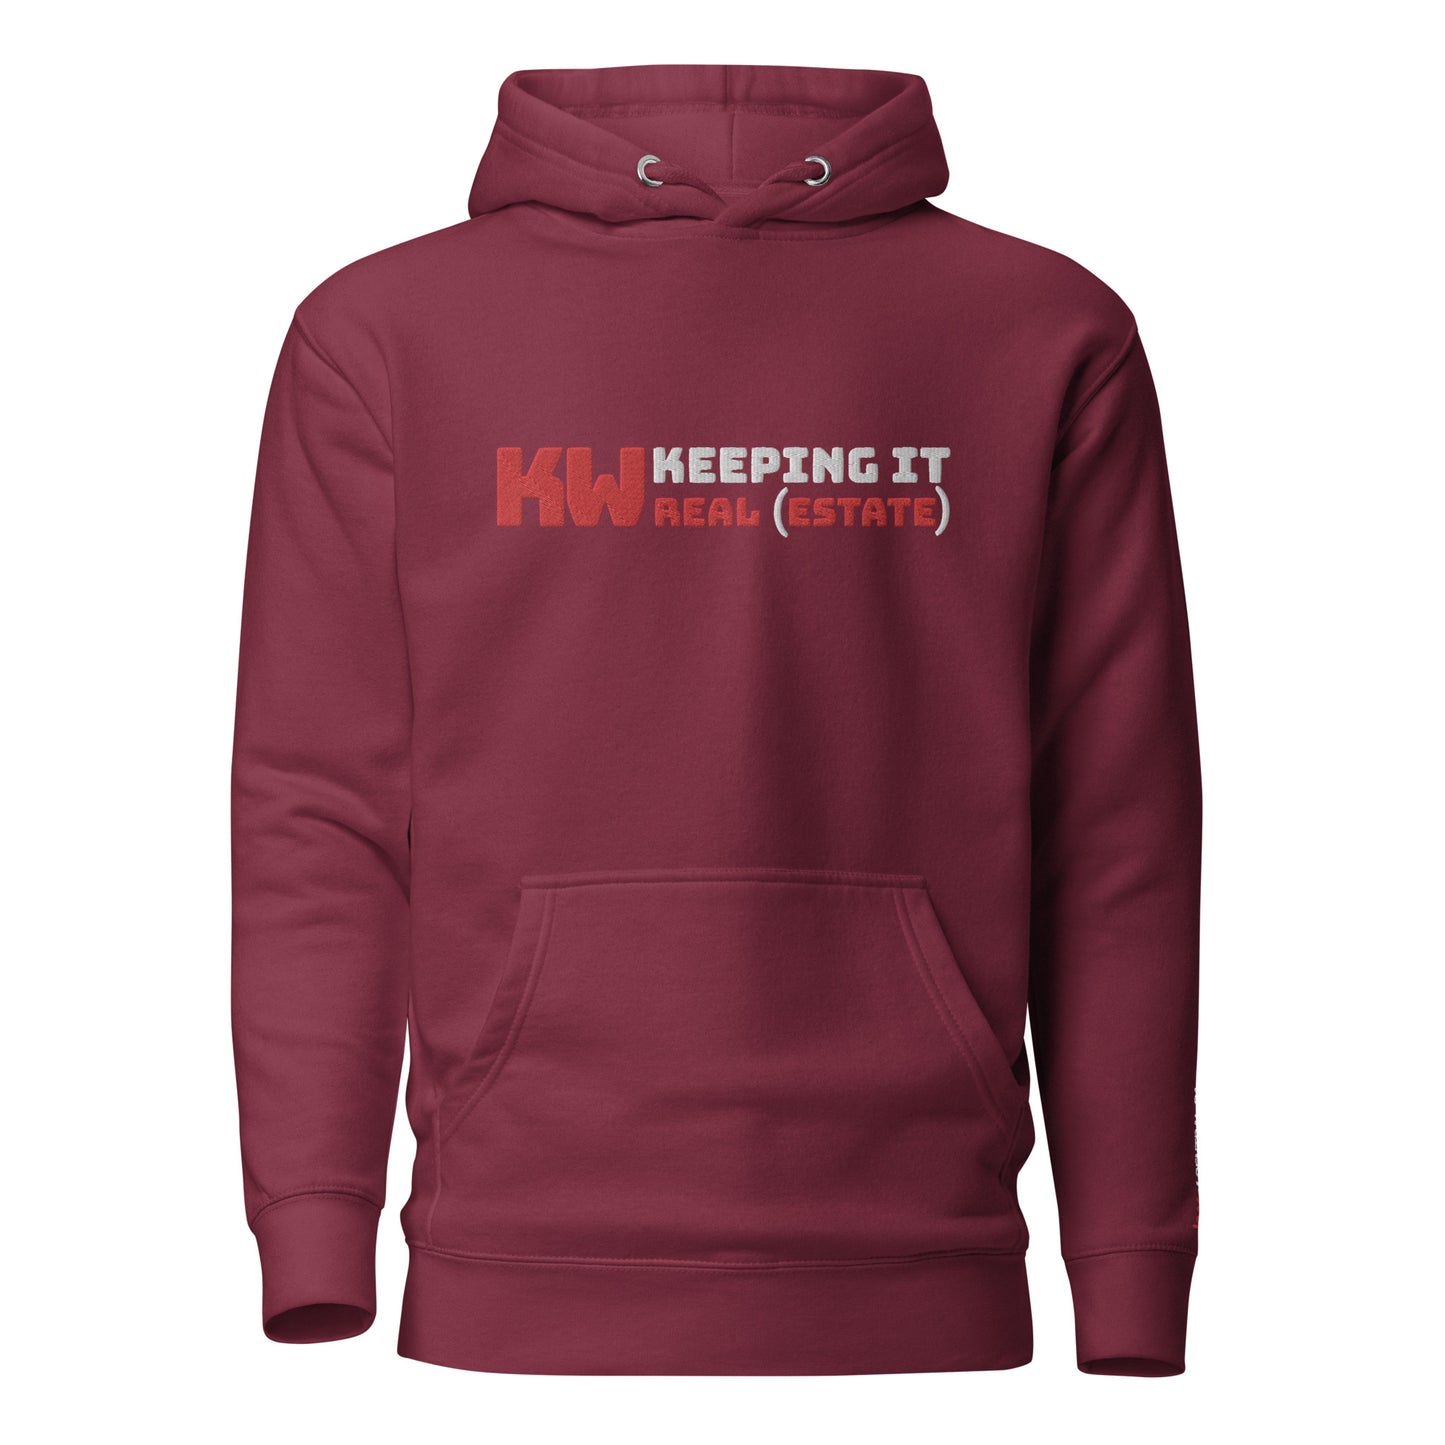 Keeping It Real Estate Hoodie (Embroidered)